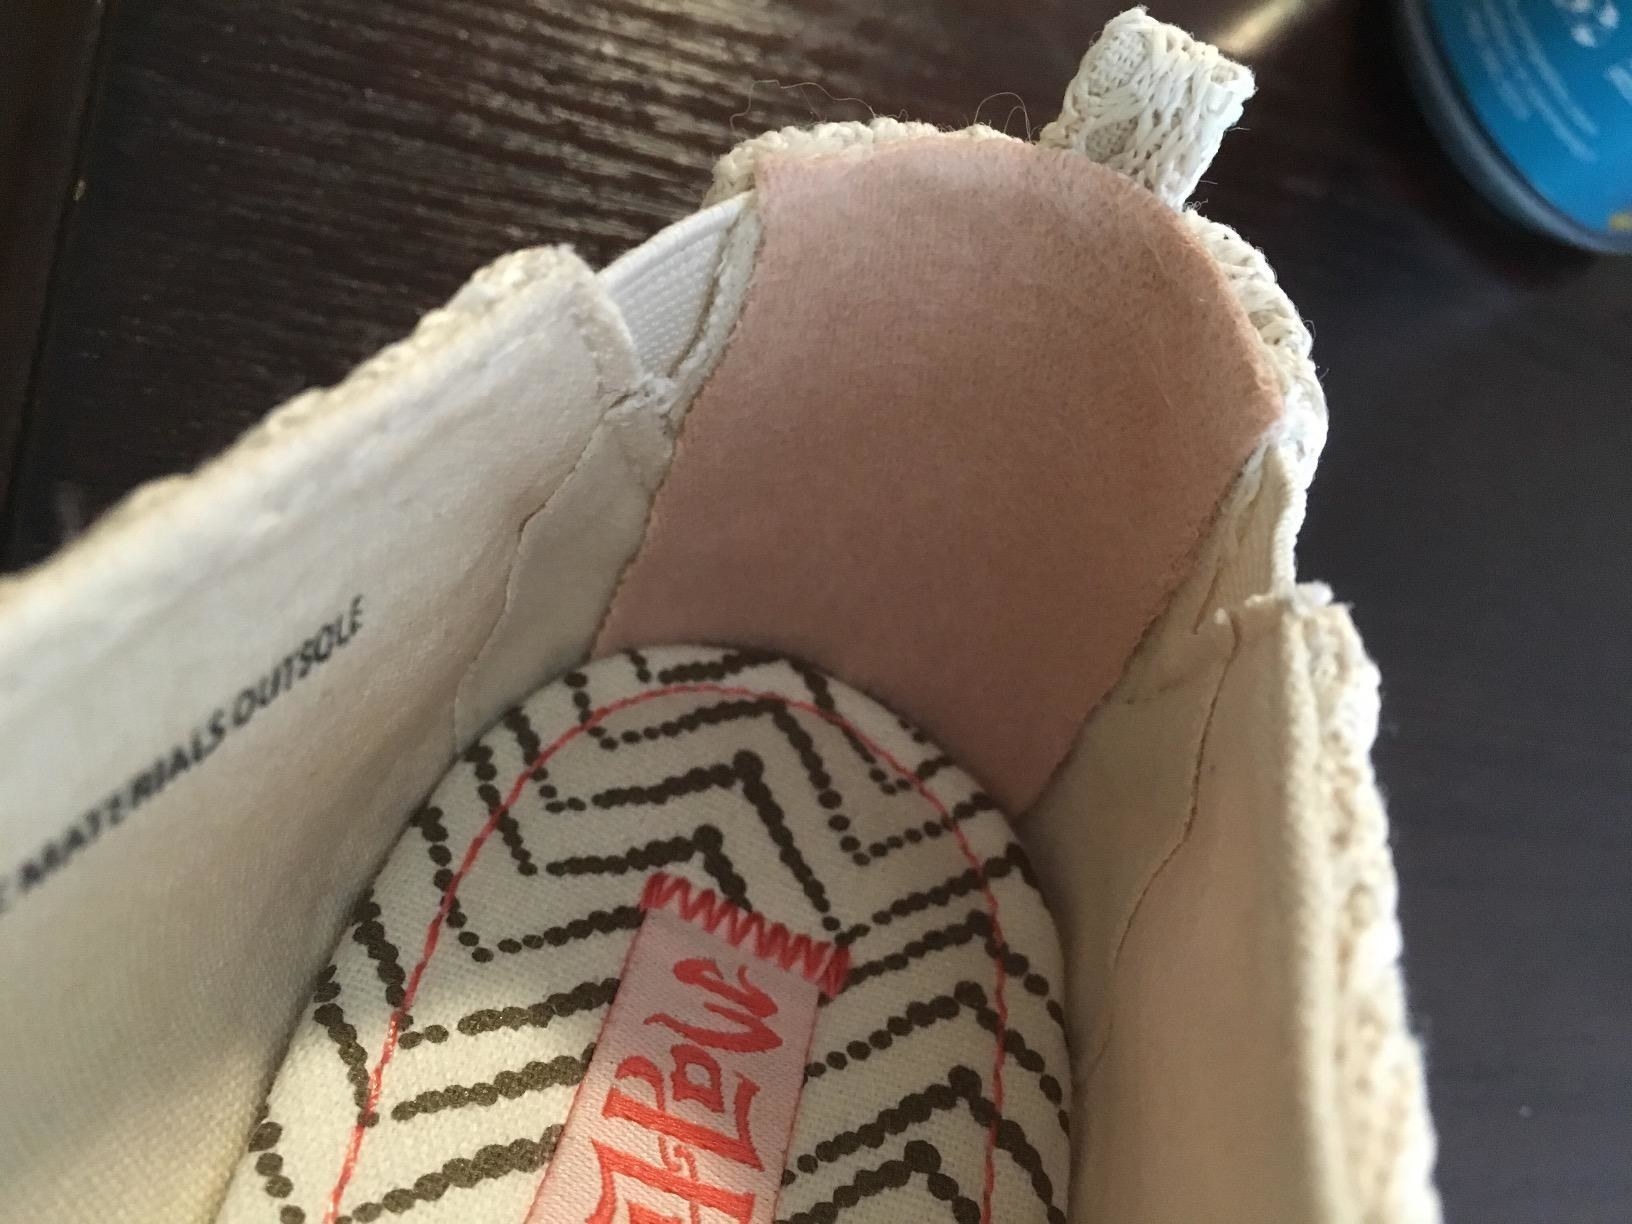 Reviewer&#x27;s photo of their shoe with moleskin attached in the heel